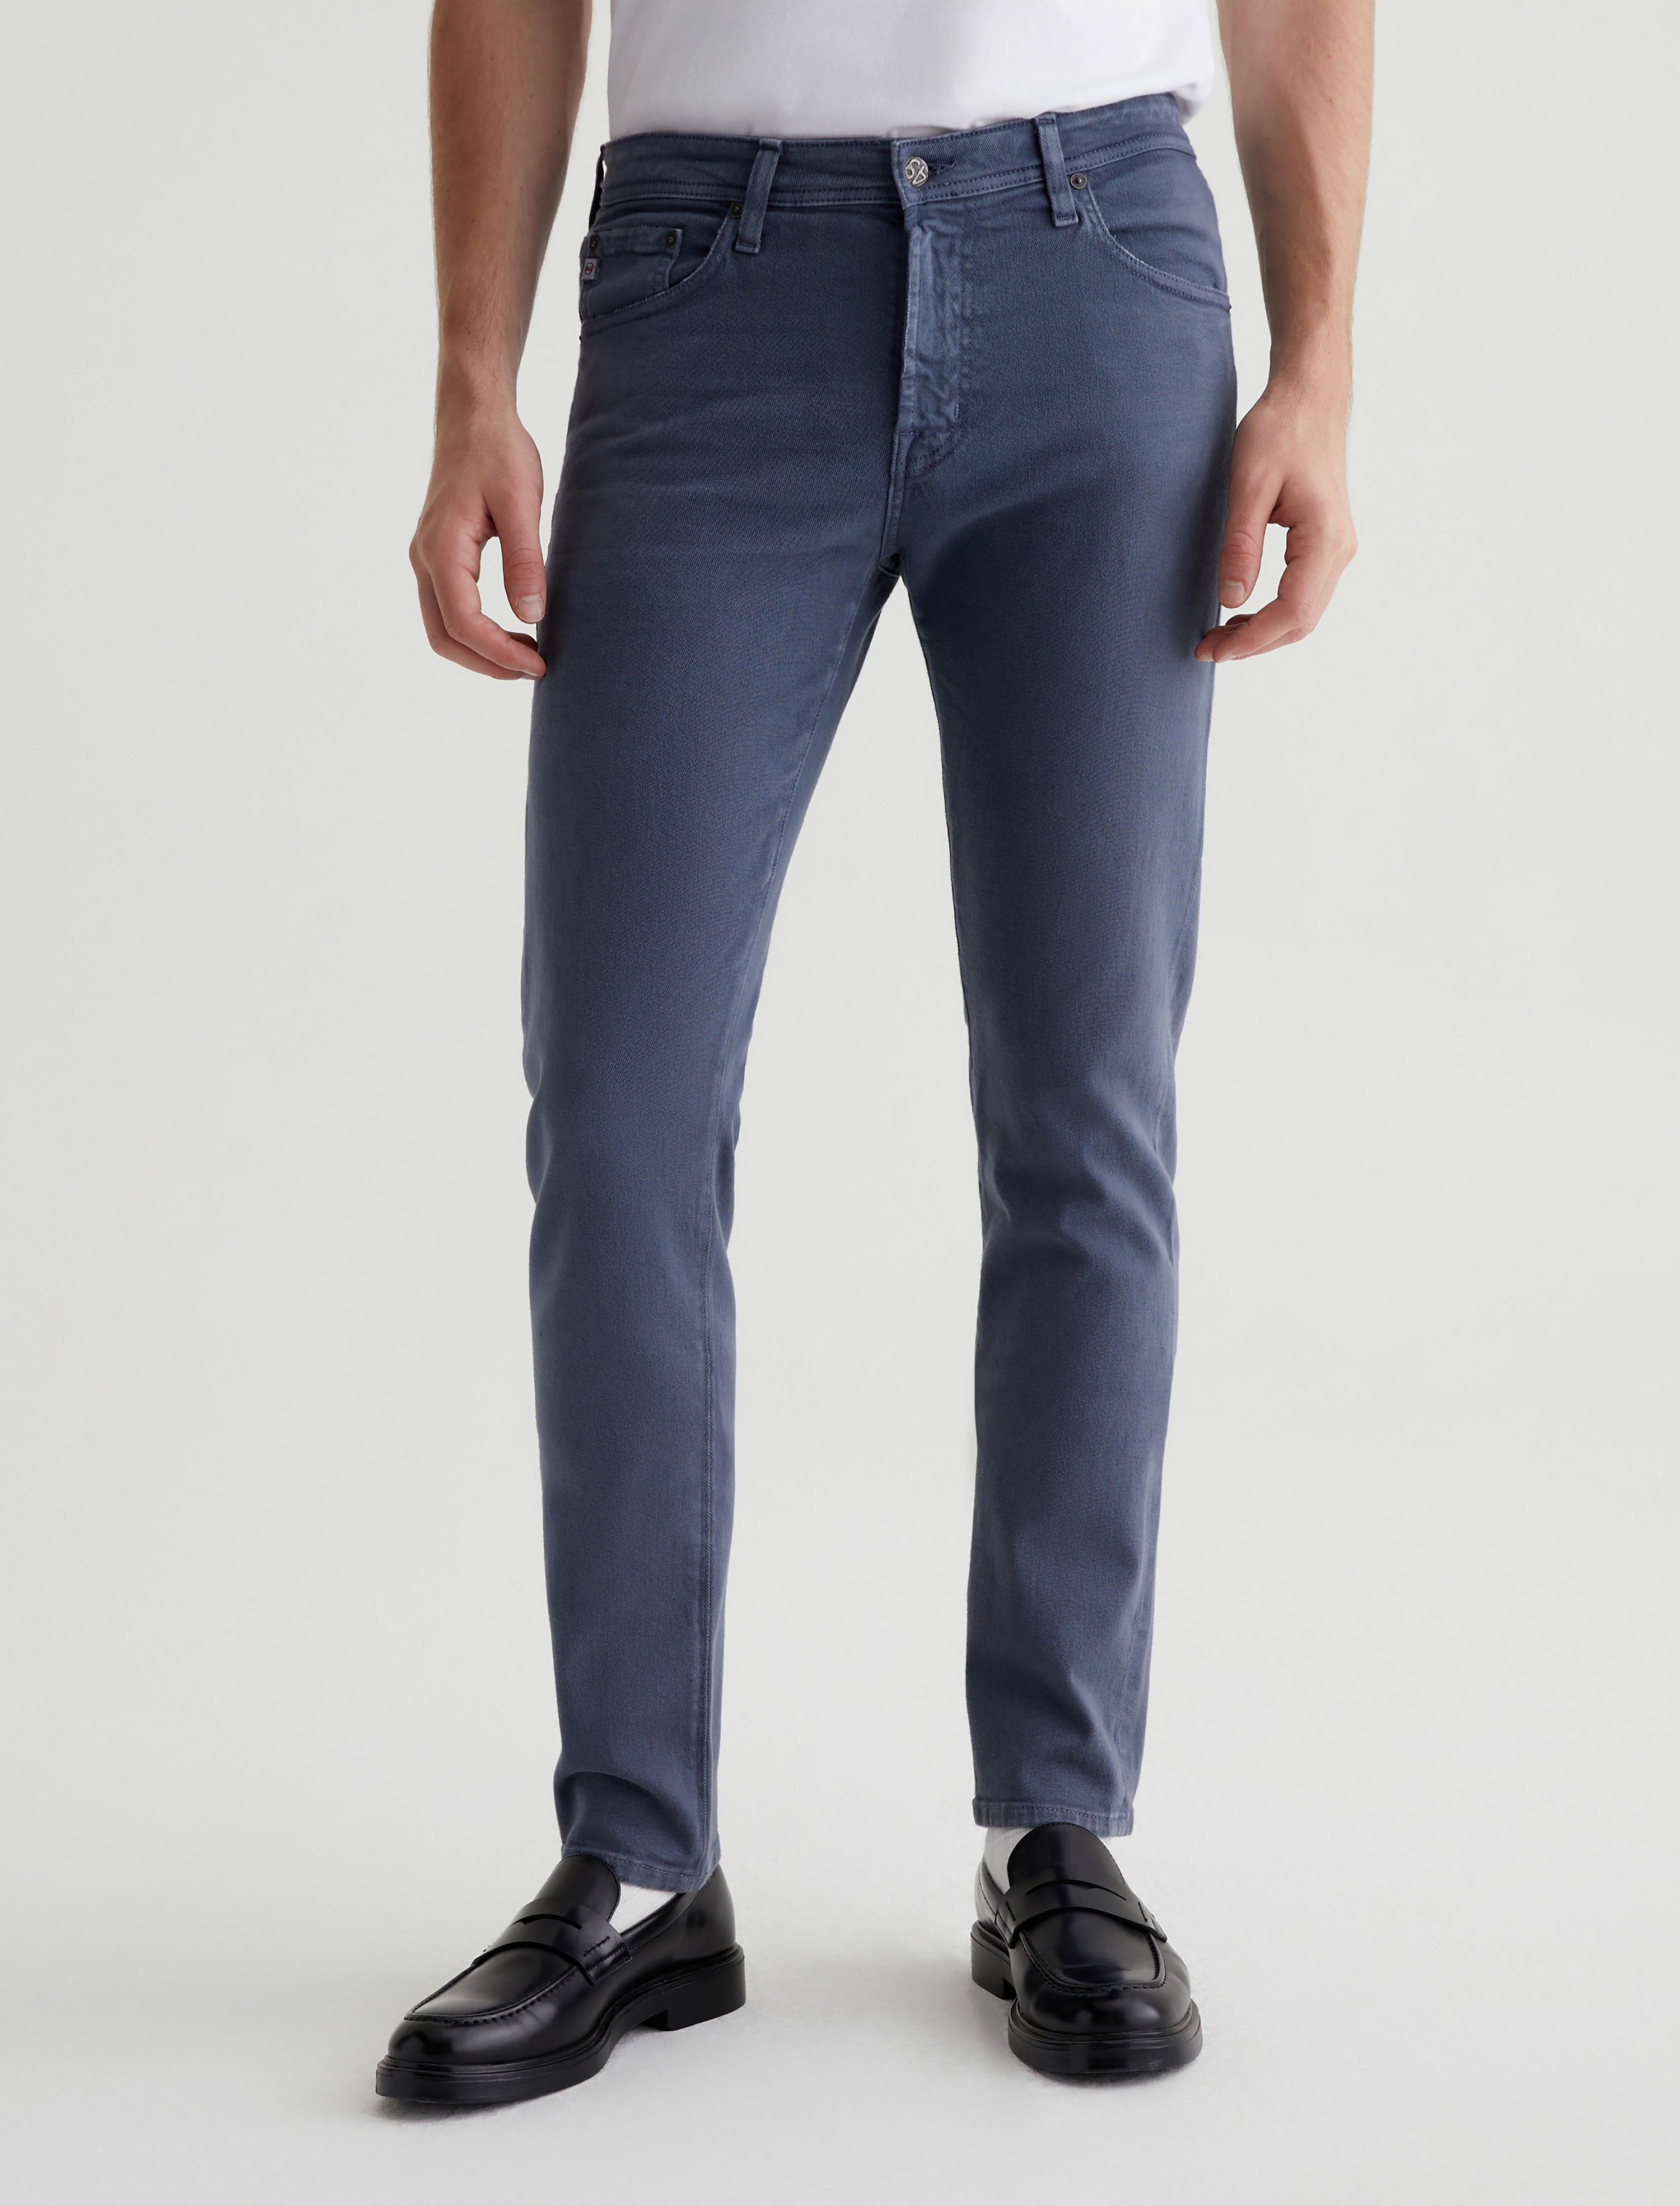 Mens Tellis 7 Years Sulfur Blue Note at AG Jeans Official Store